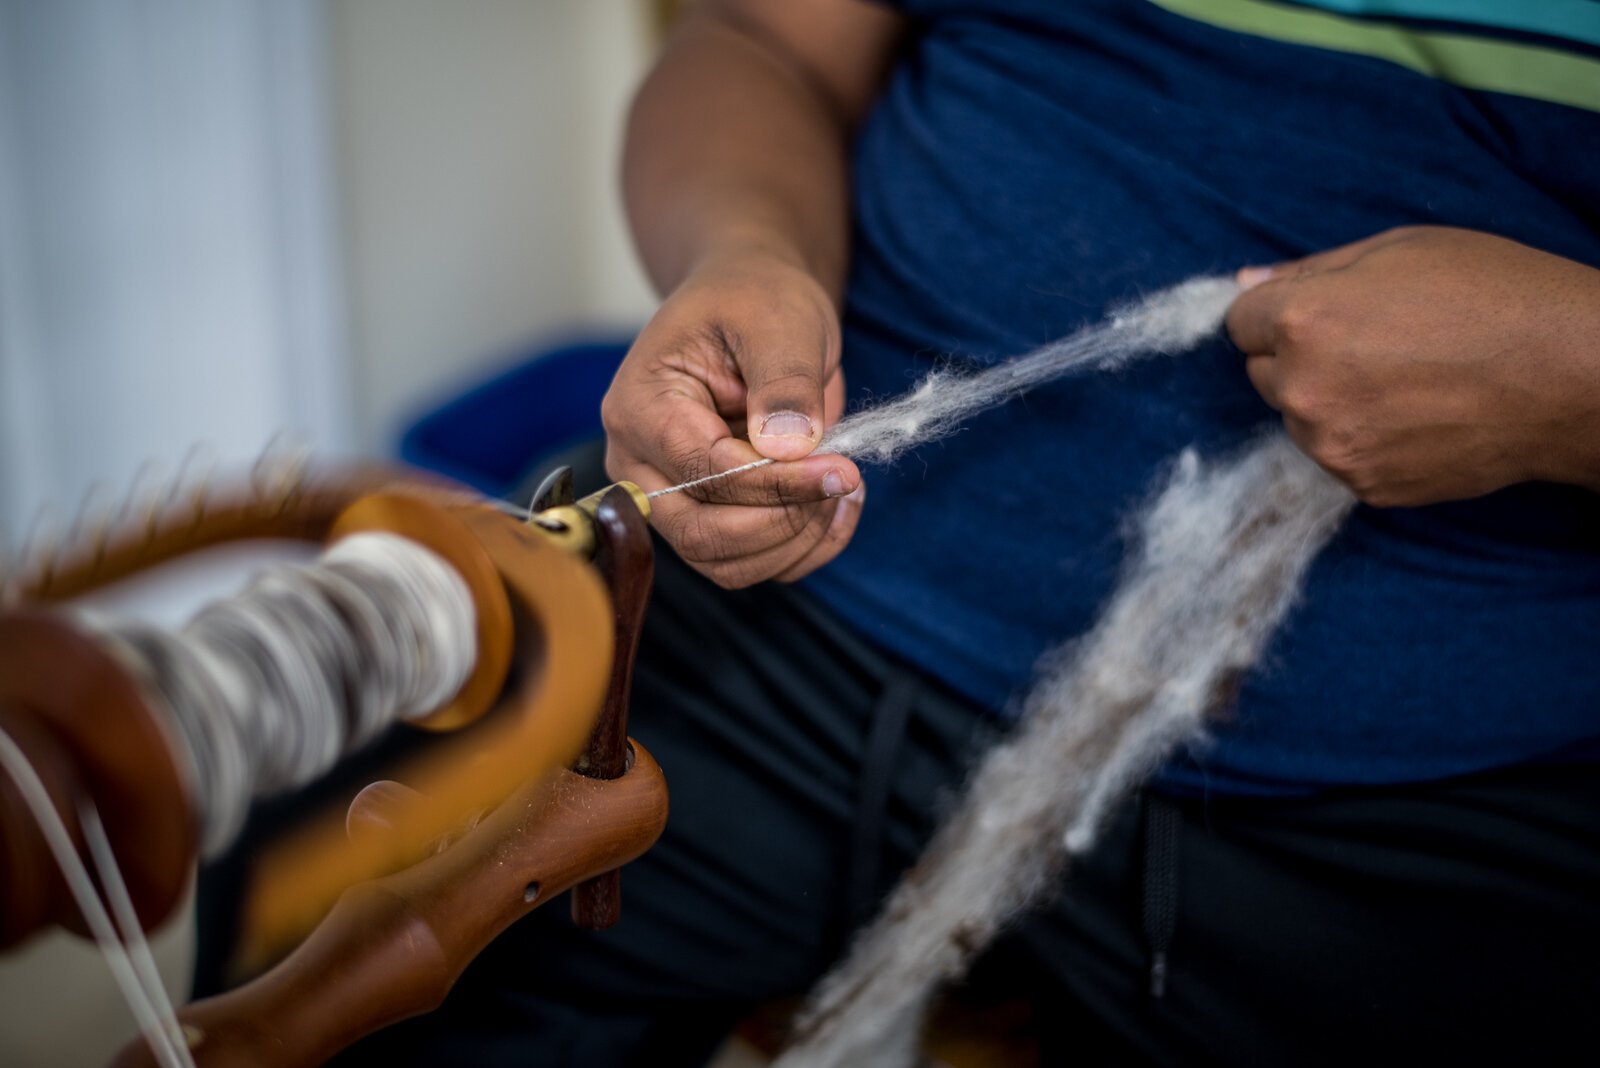 Residents and participants spin wool in the Woolery.